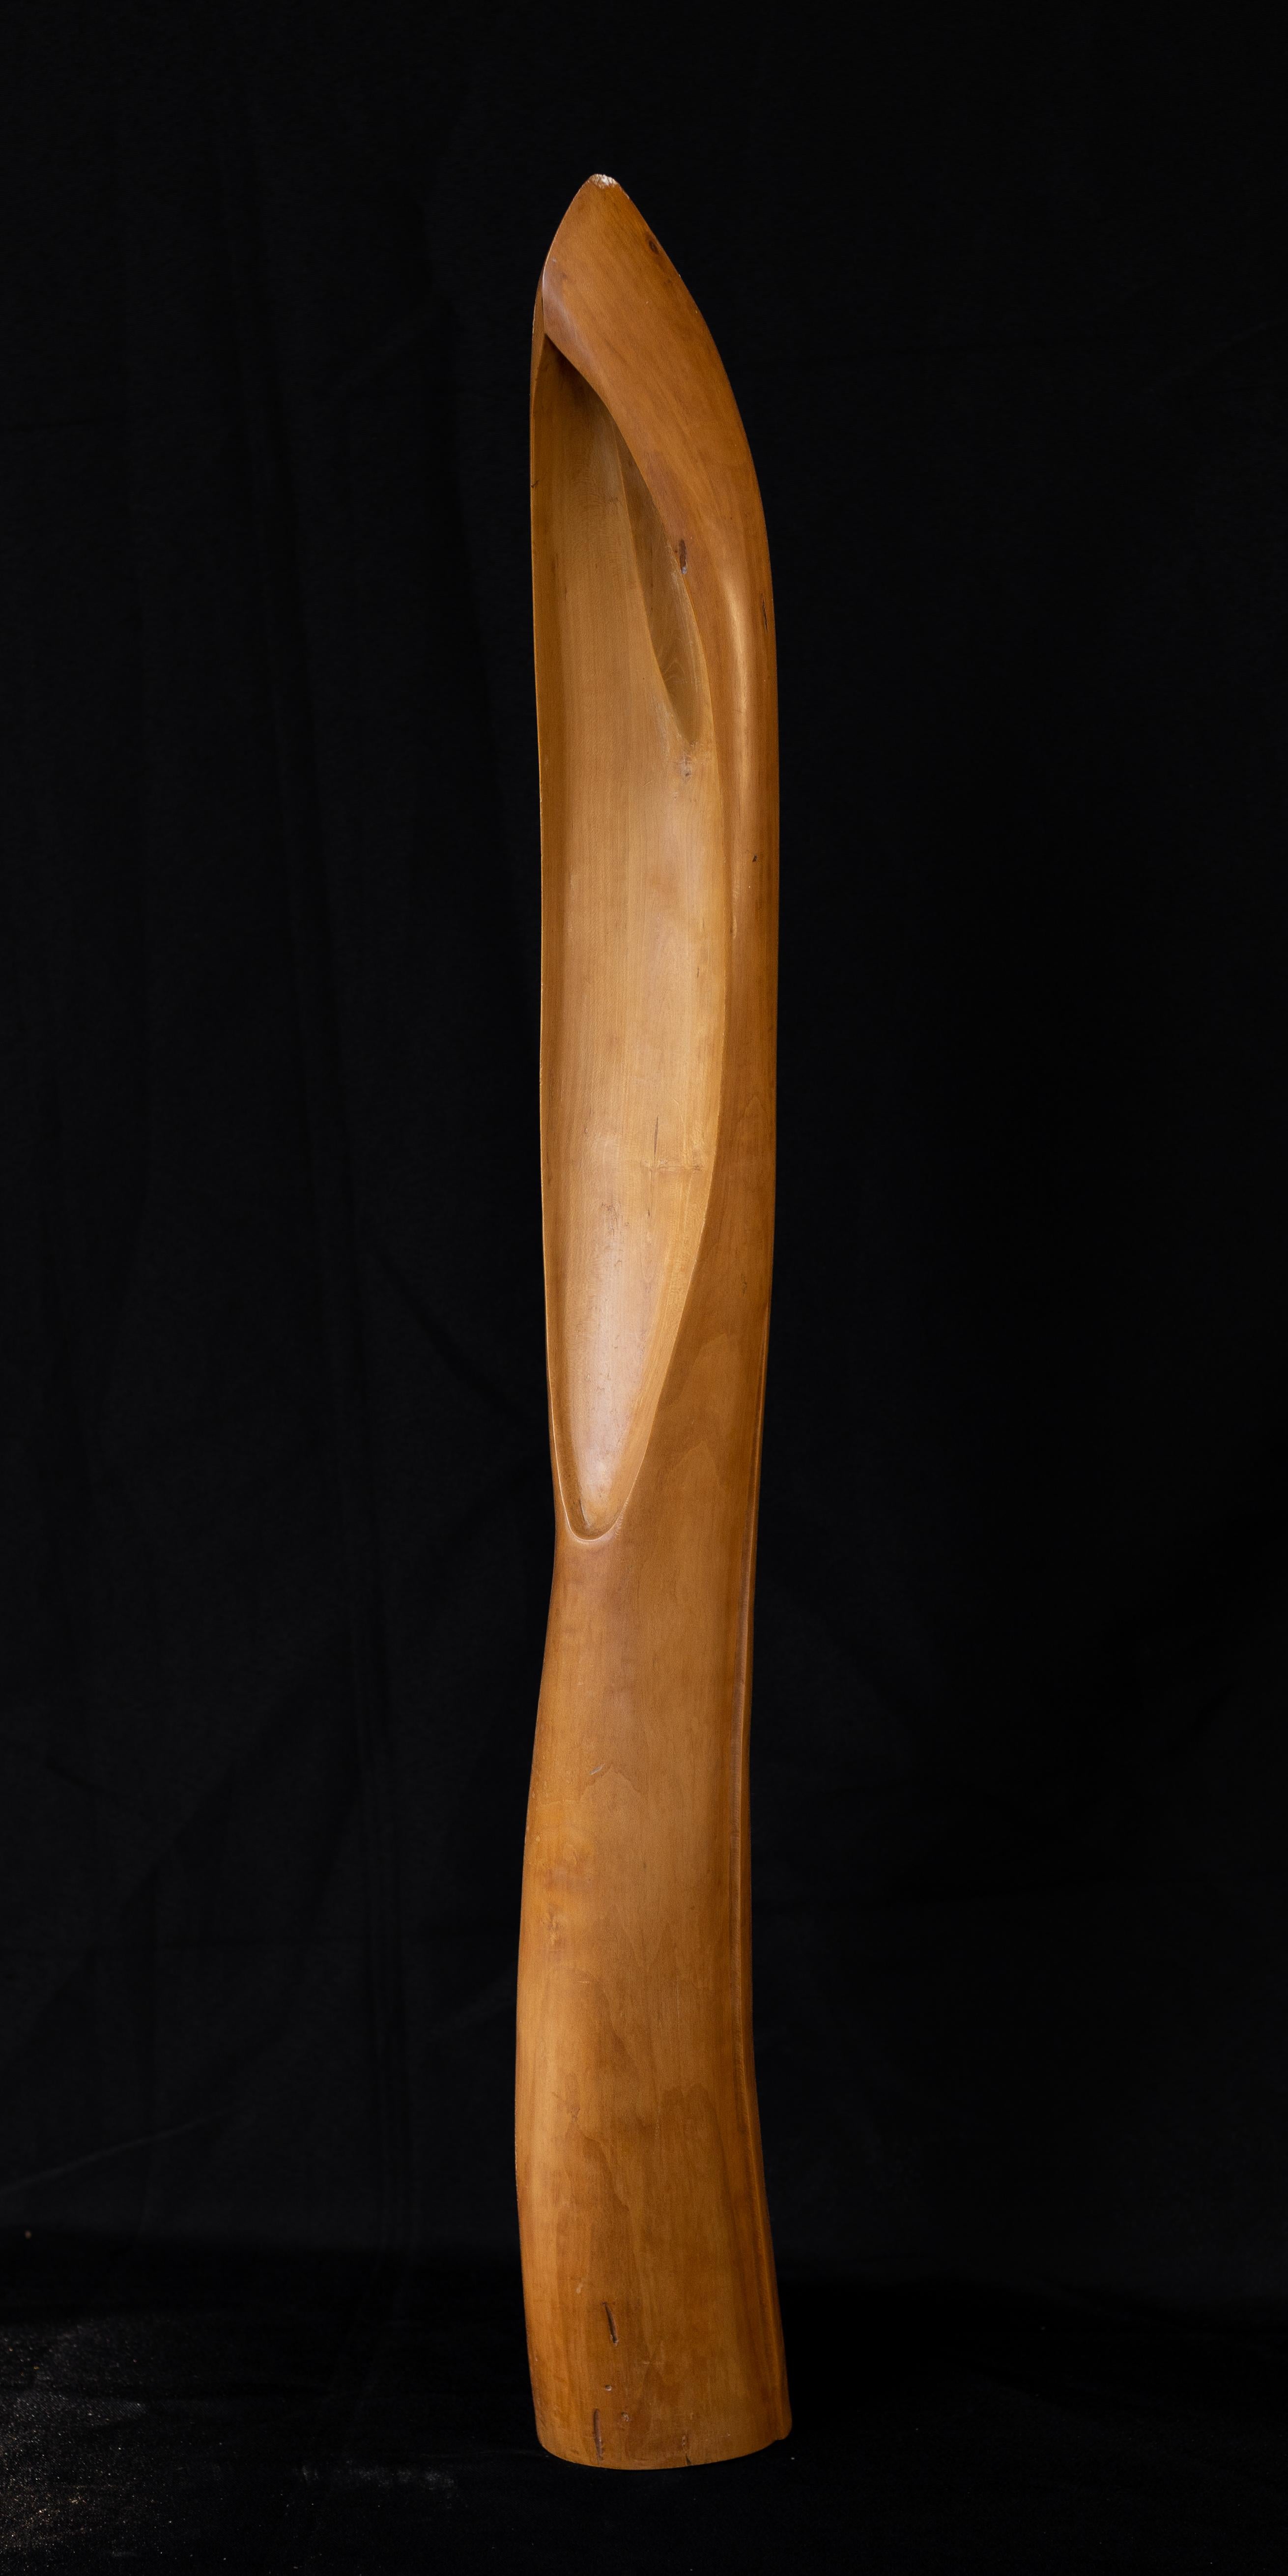 Wooden abstract sculpture by Texas artist Duff Browne measuring 30.5 inches tall and 3 inches wide.